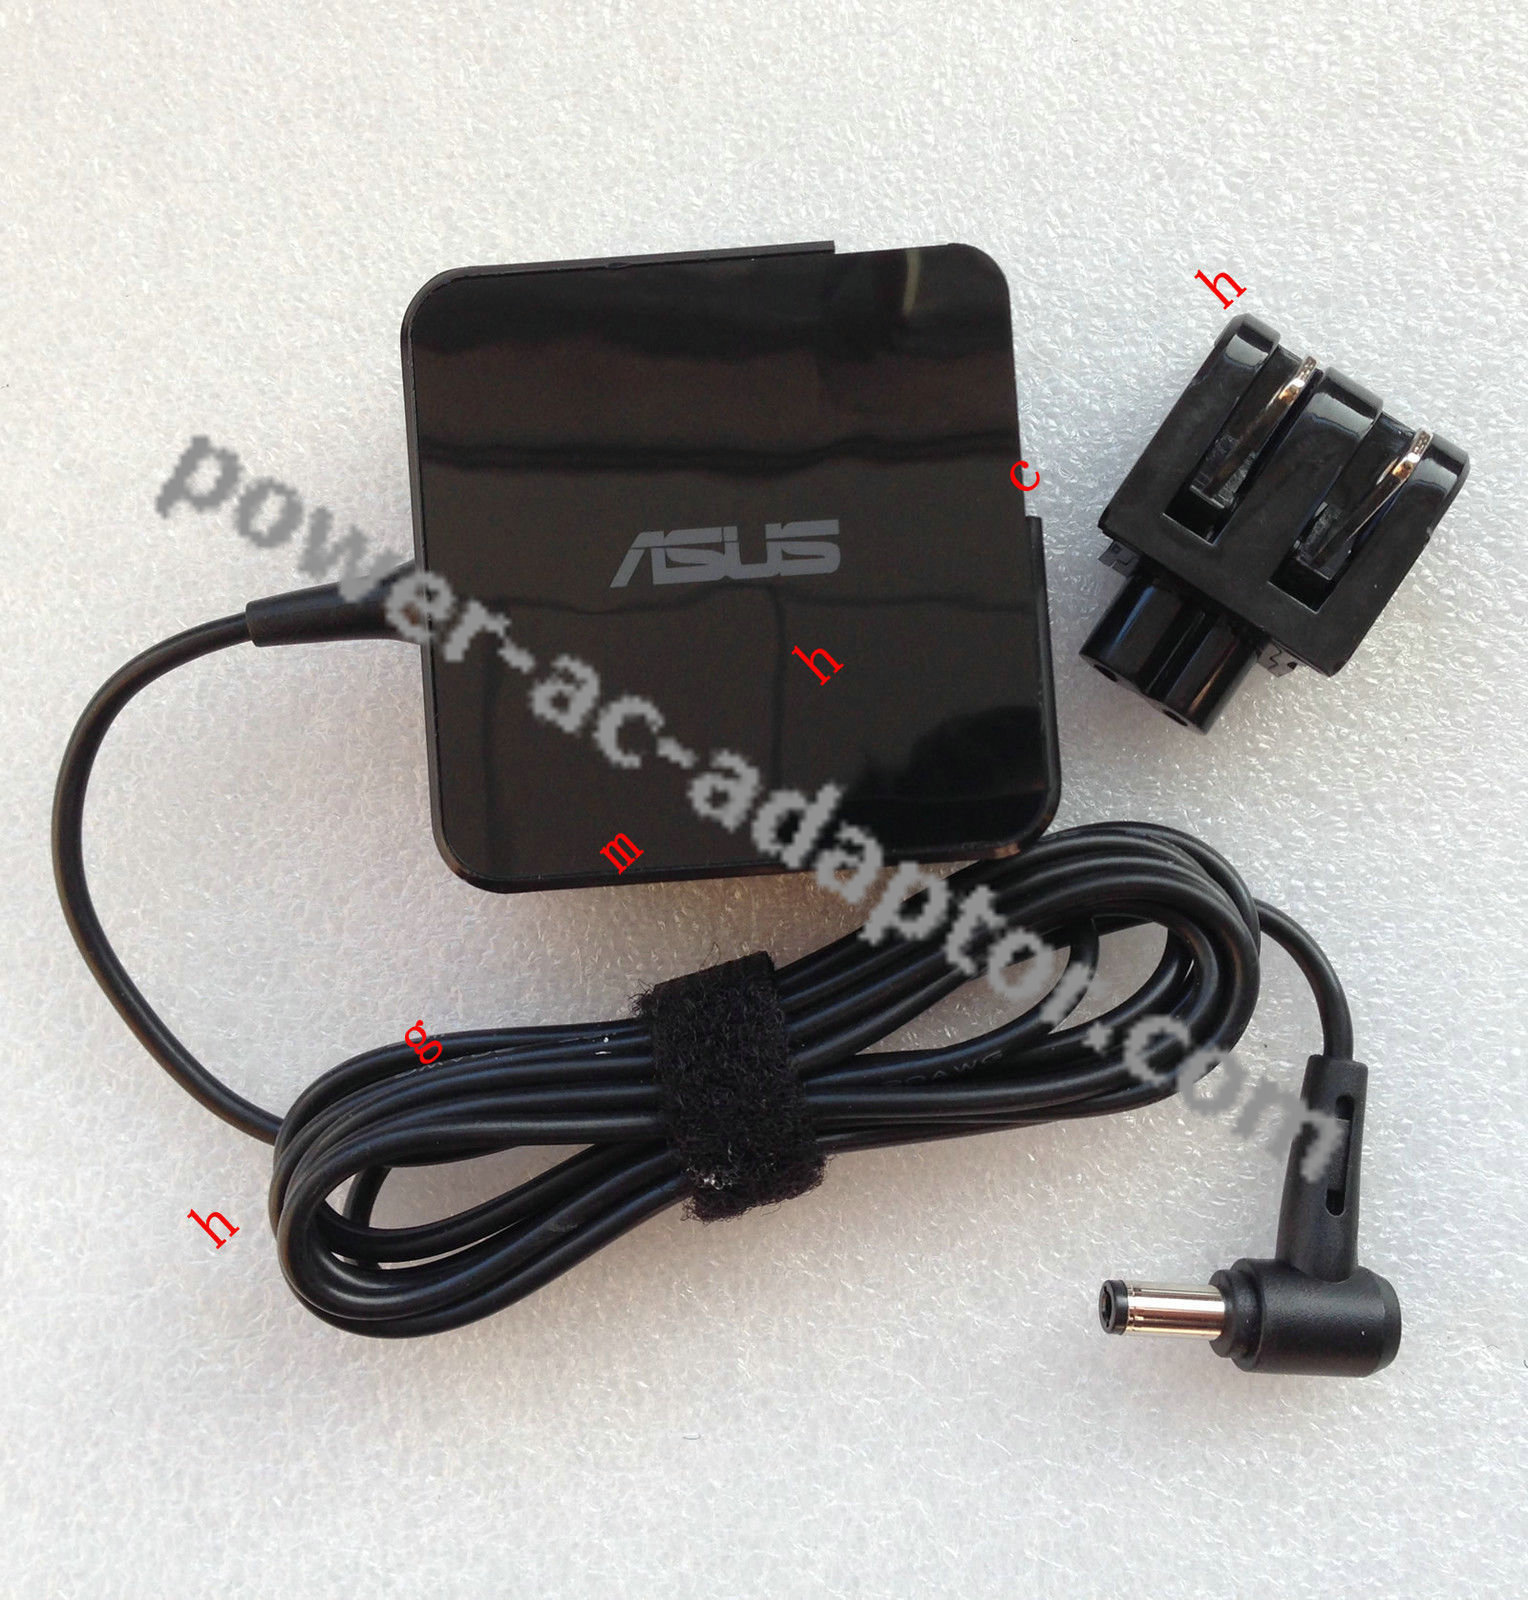 OEM 33W AC Power Adapter Cord for Asus X551MA-SX298H Notebook